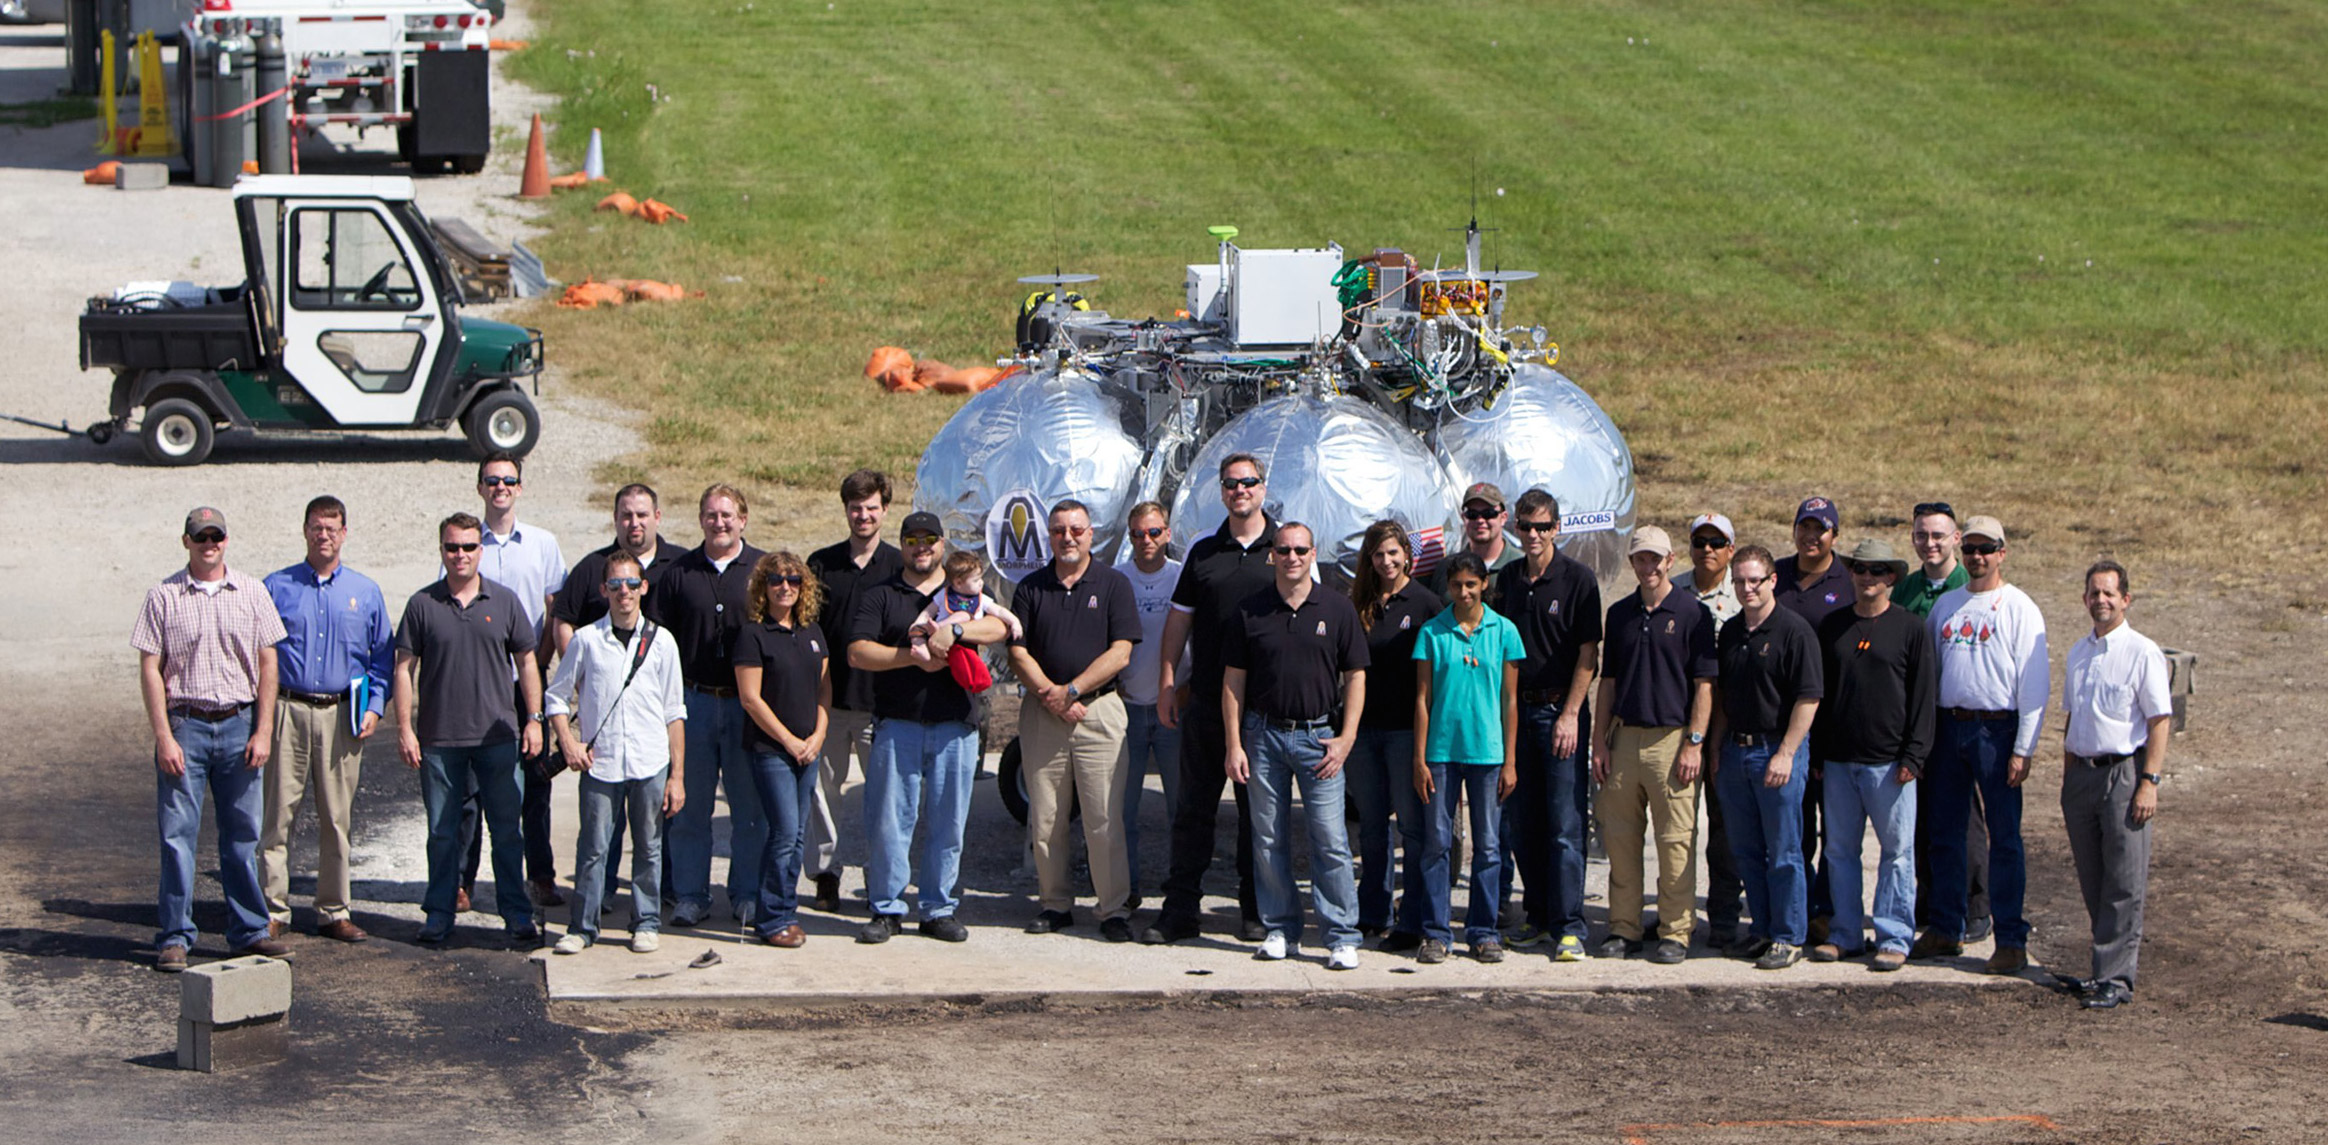 Members of the Project Morpheus team pose for a group photo during the 11th tether test of the prototype lander which took place in 2012 at the Johnson Space Center VTB Flight Complex. Credit: NASA/Joe Bibby